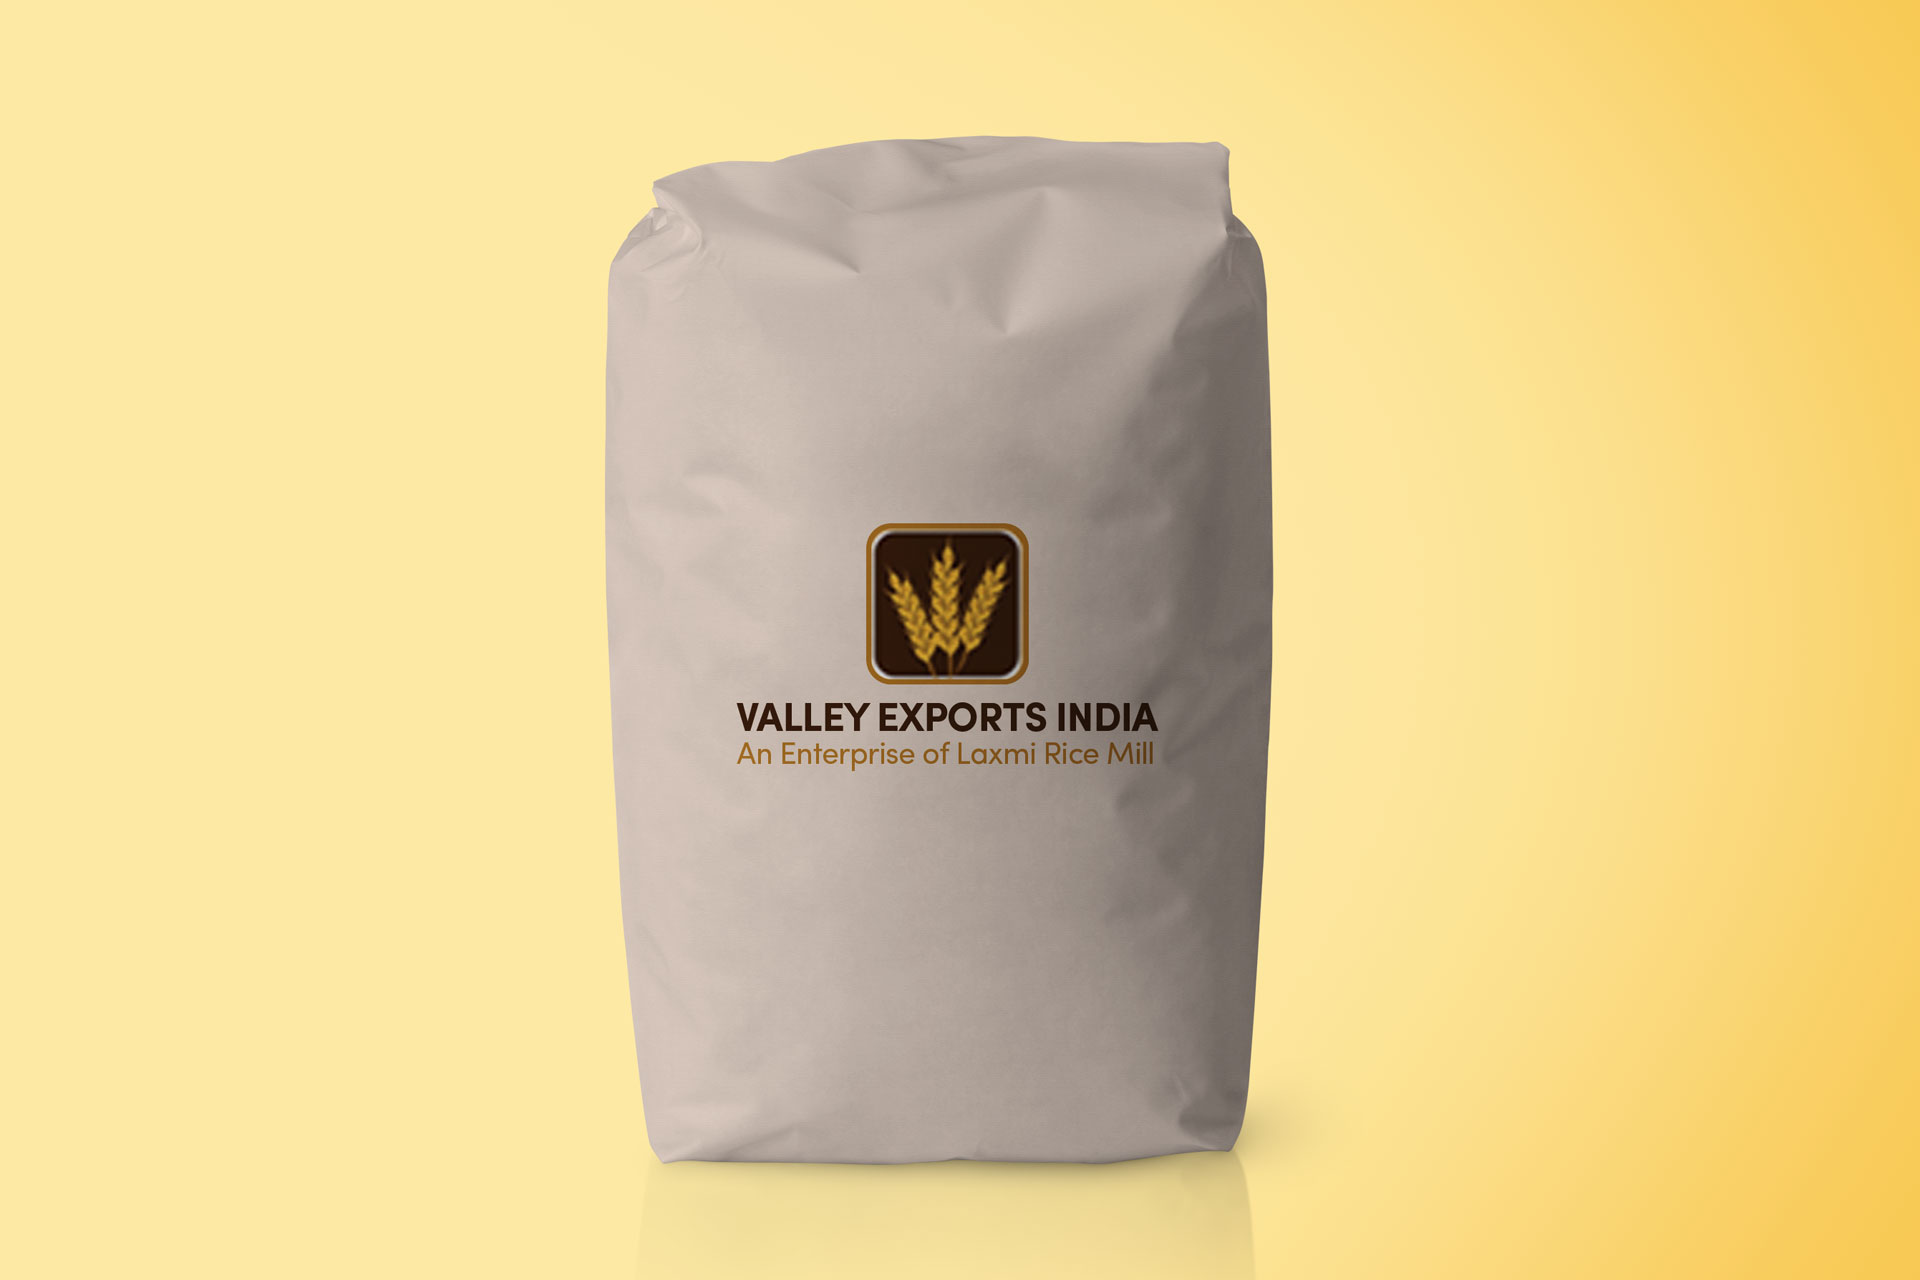 Valley Export India is a rice manufacturer that delivers its products within India and outside India in some countries.